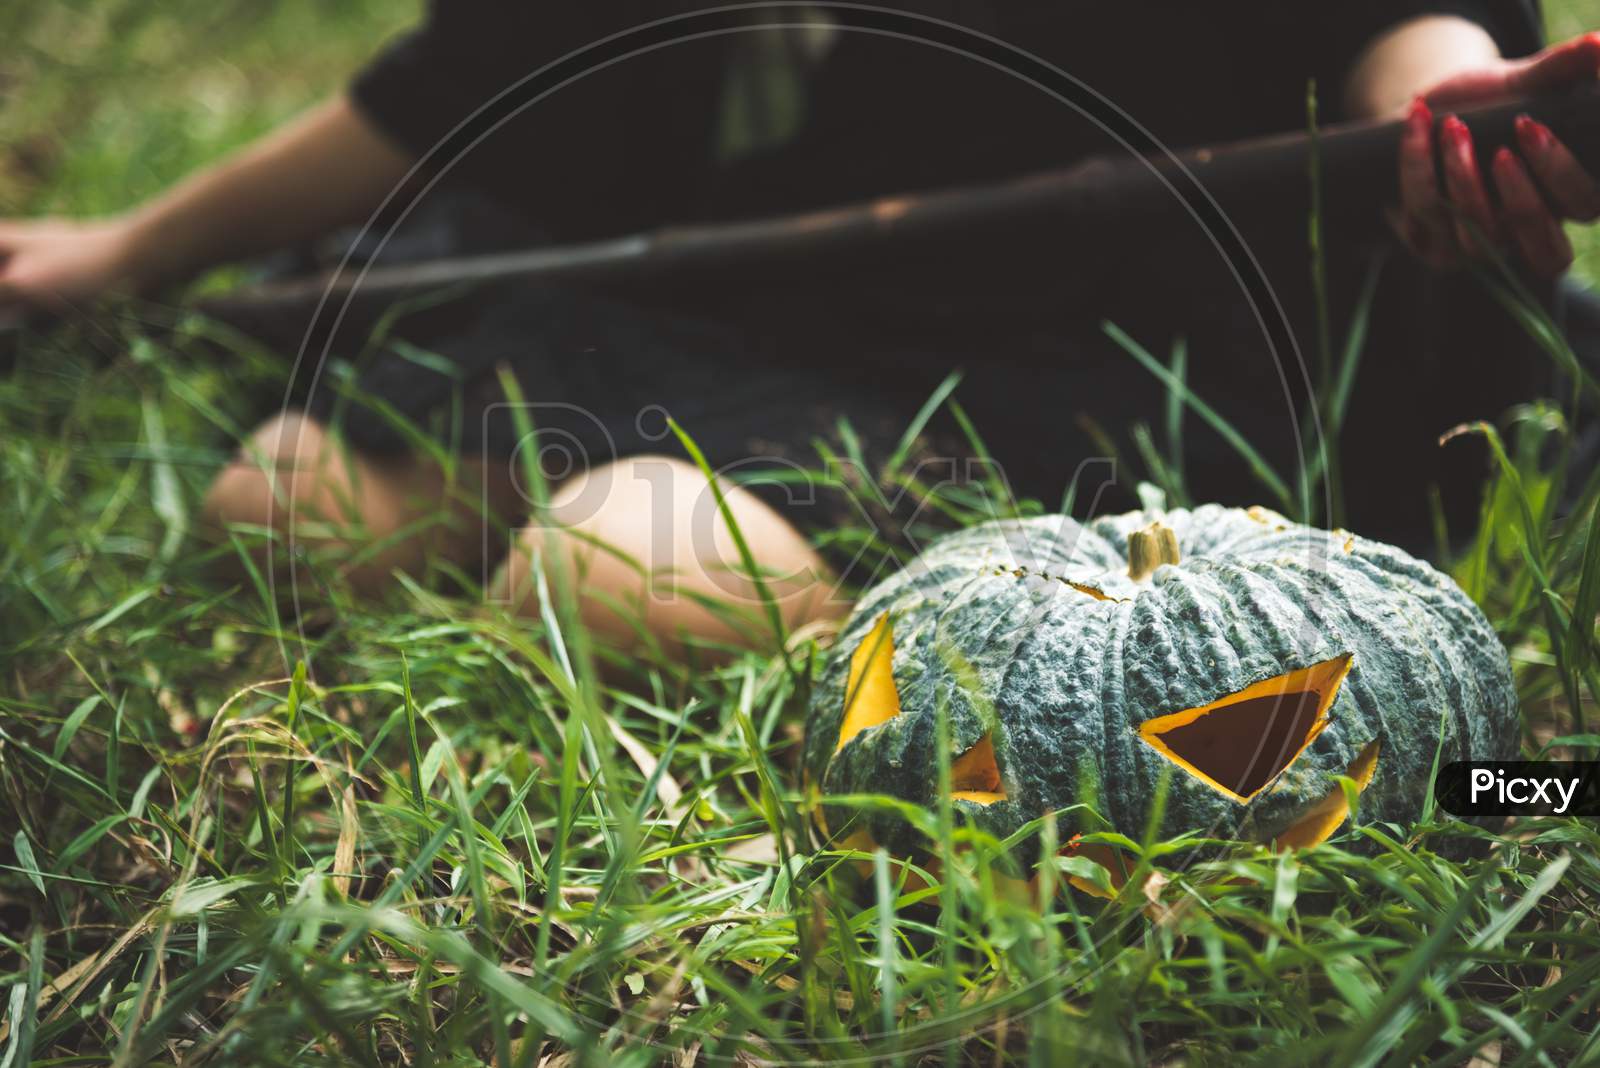 Close Up Of Green Pumpkin Lantern On Grass With Female Wizard Holding Magic Wand Background. Halloween Day And Horror Concept. Cosplay And Playful Theme. Nature And Decoration Theme.